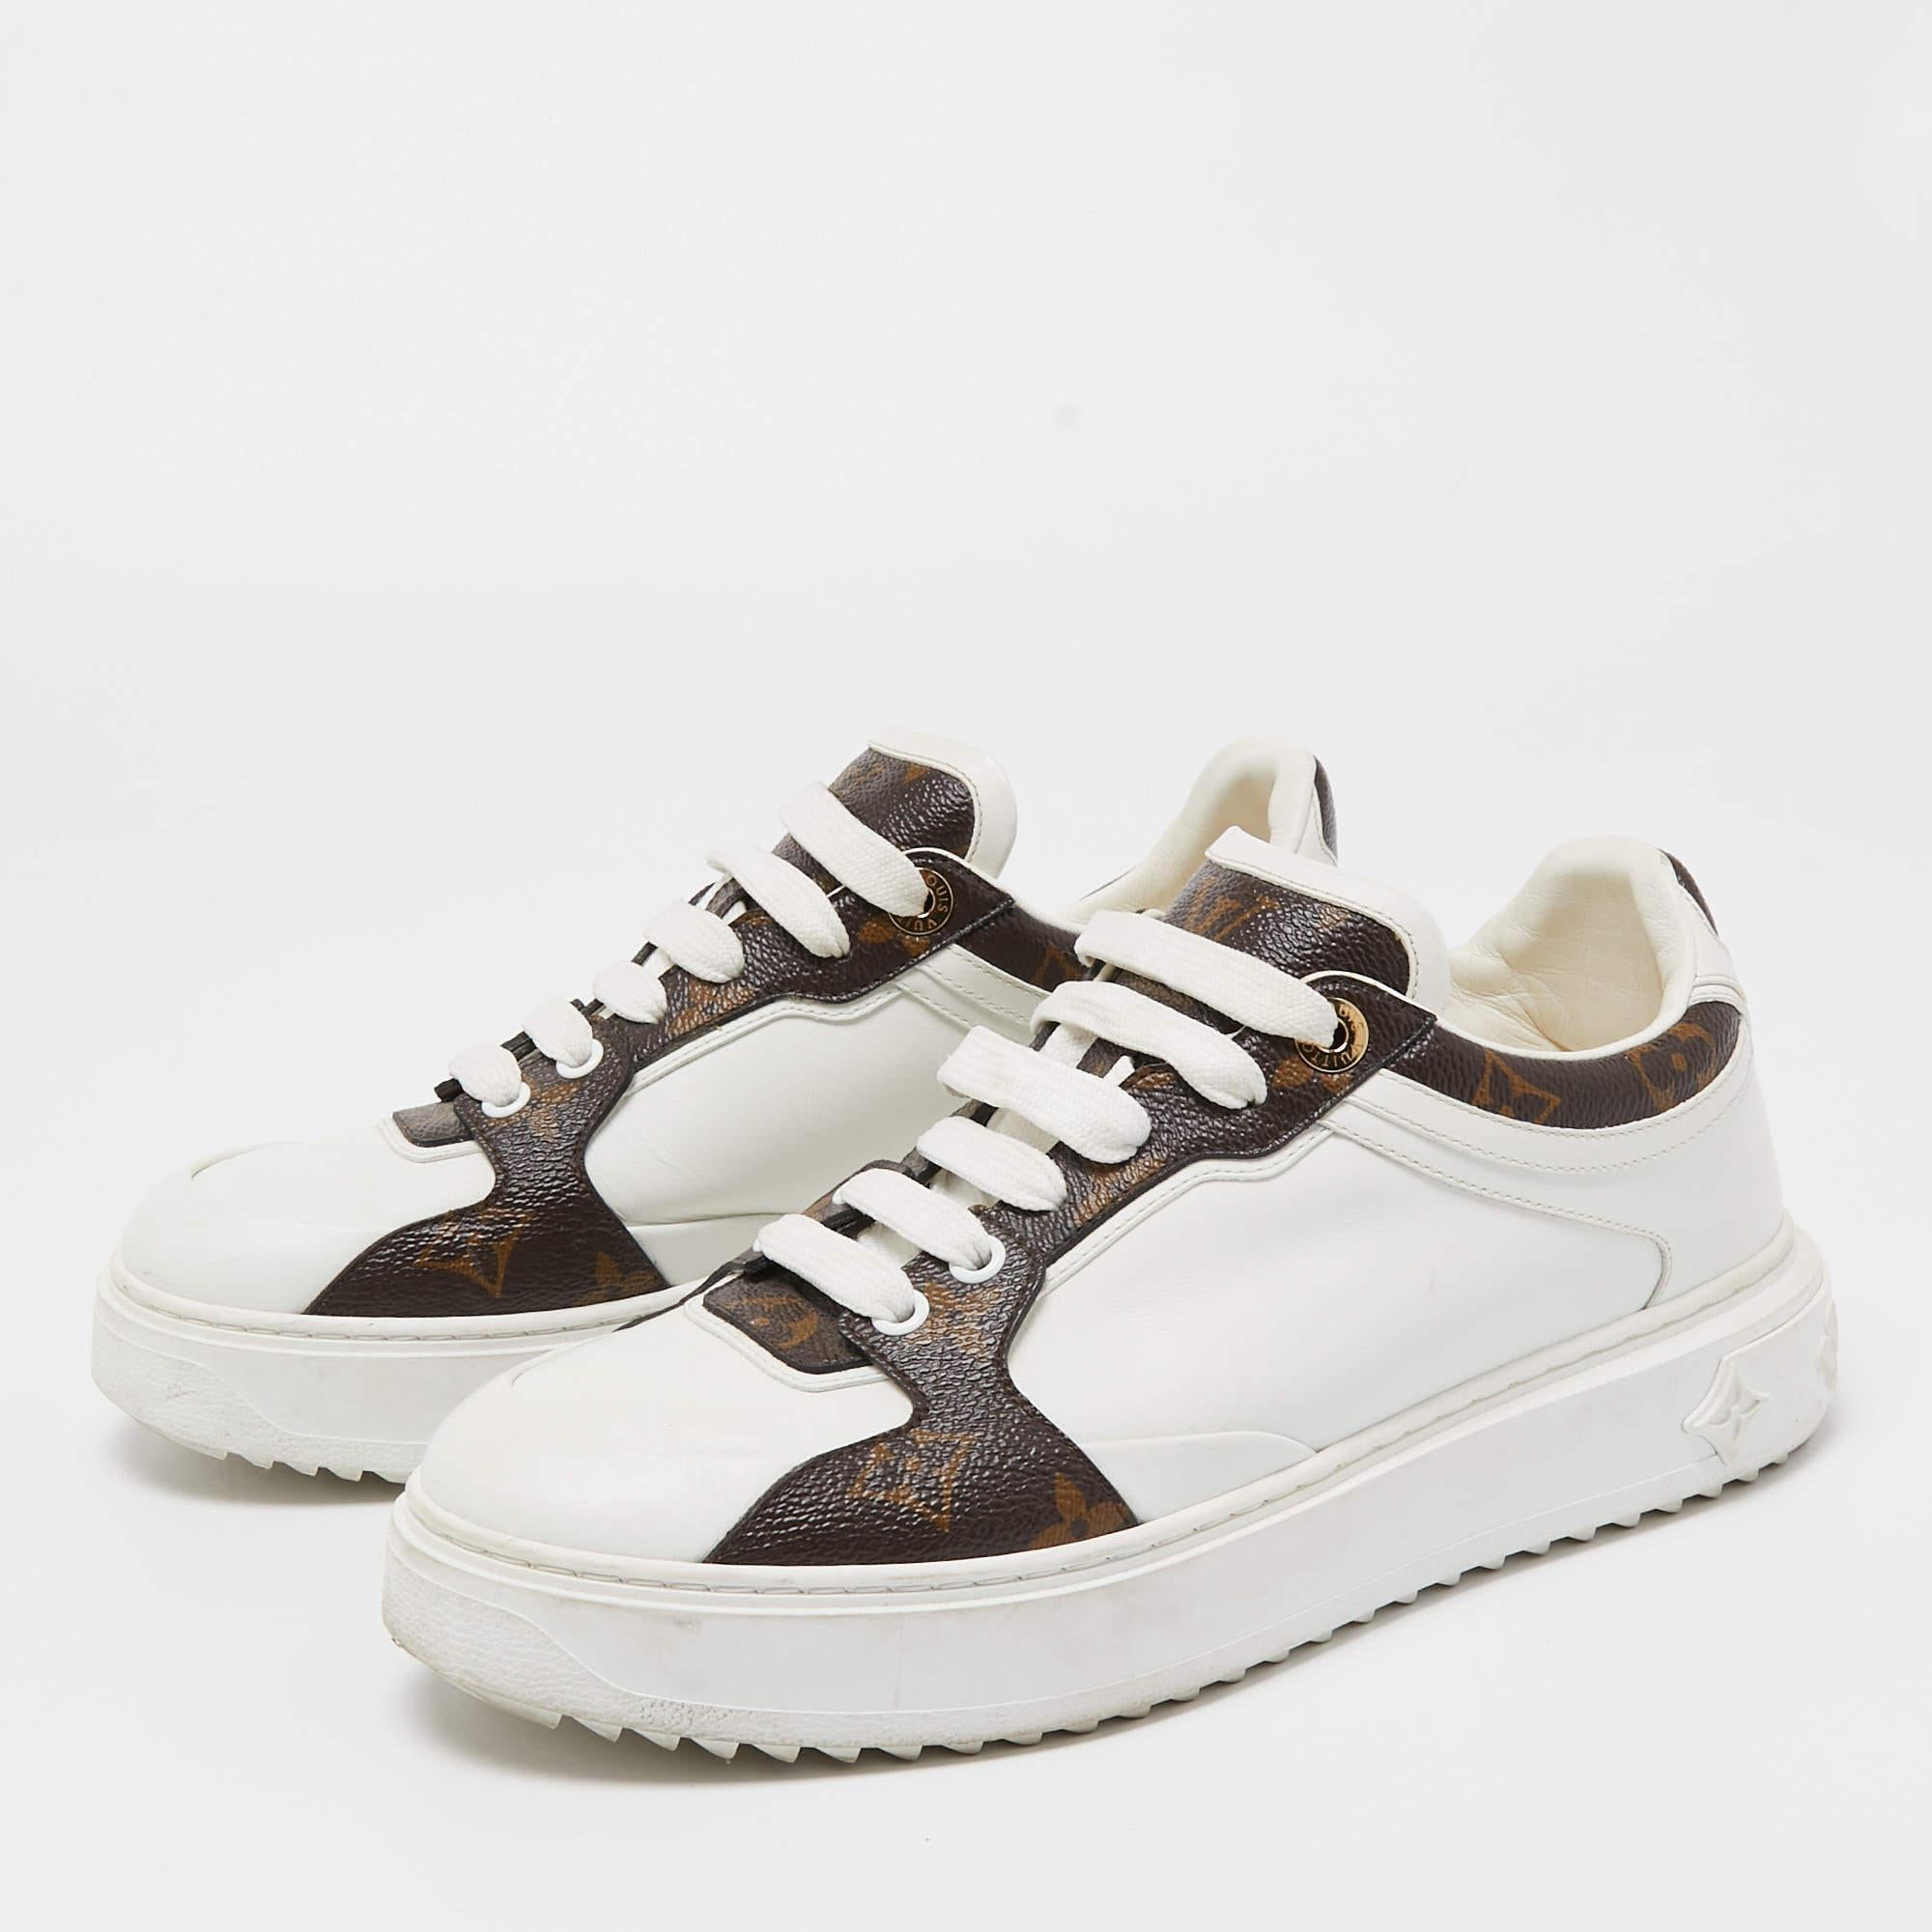 Louis Vuitton White Leather and Monogram Canvas Time Out Sneakers Size 39 2